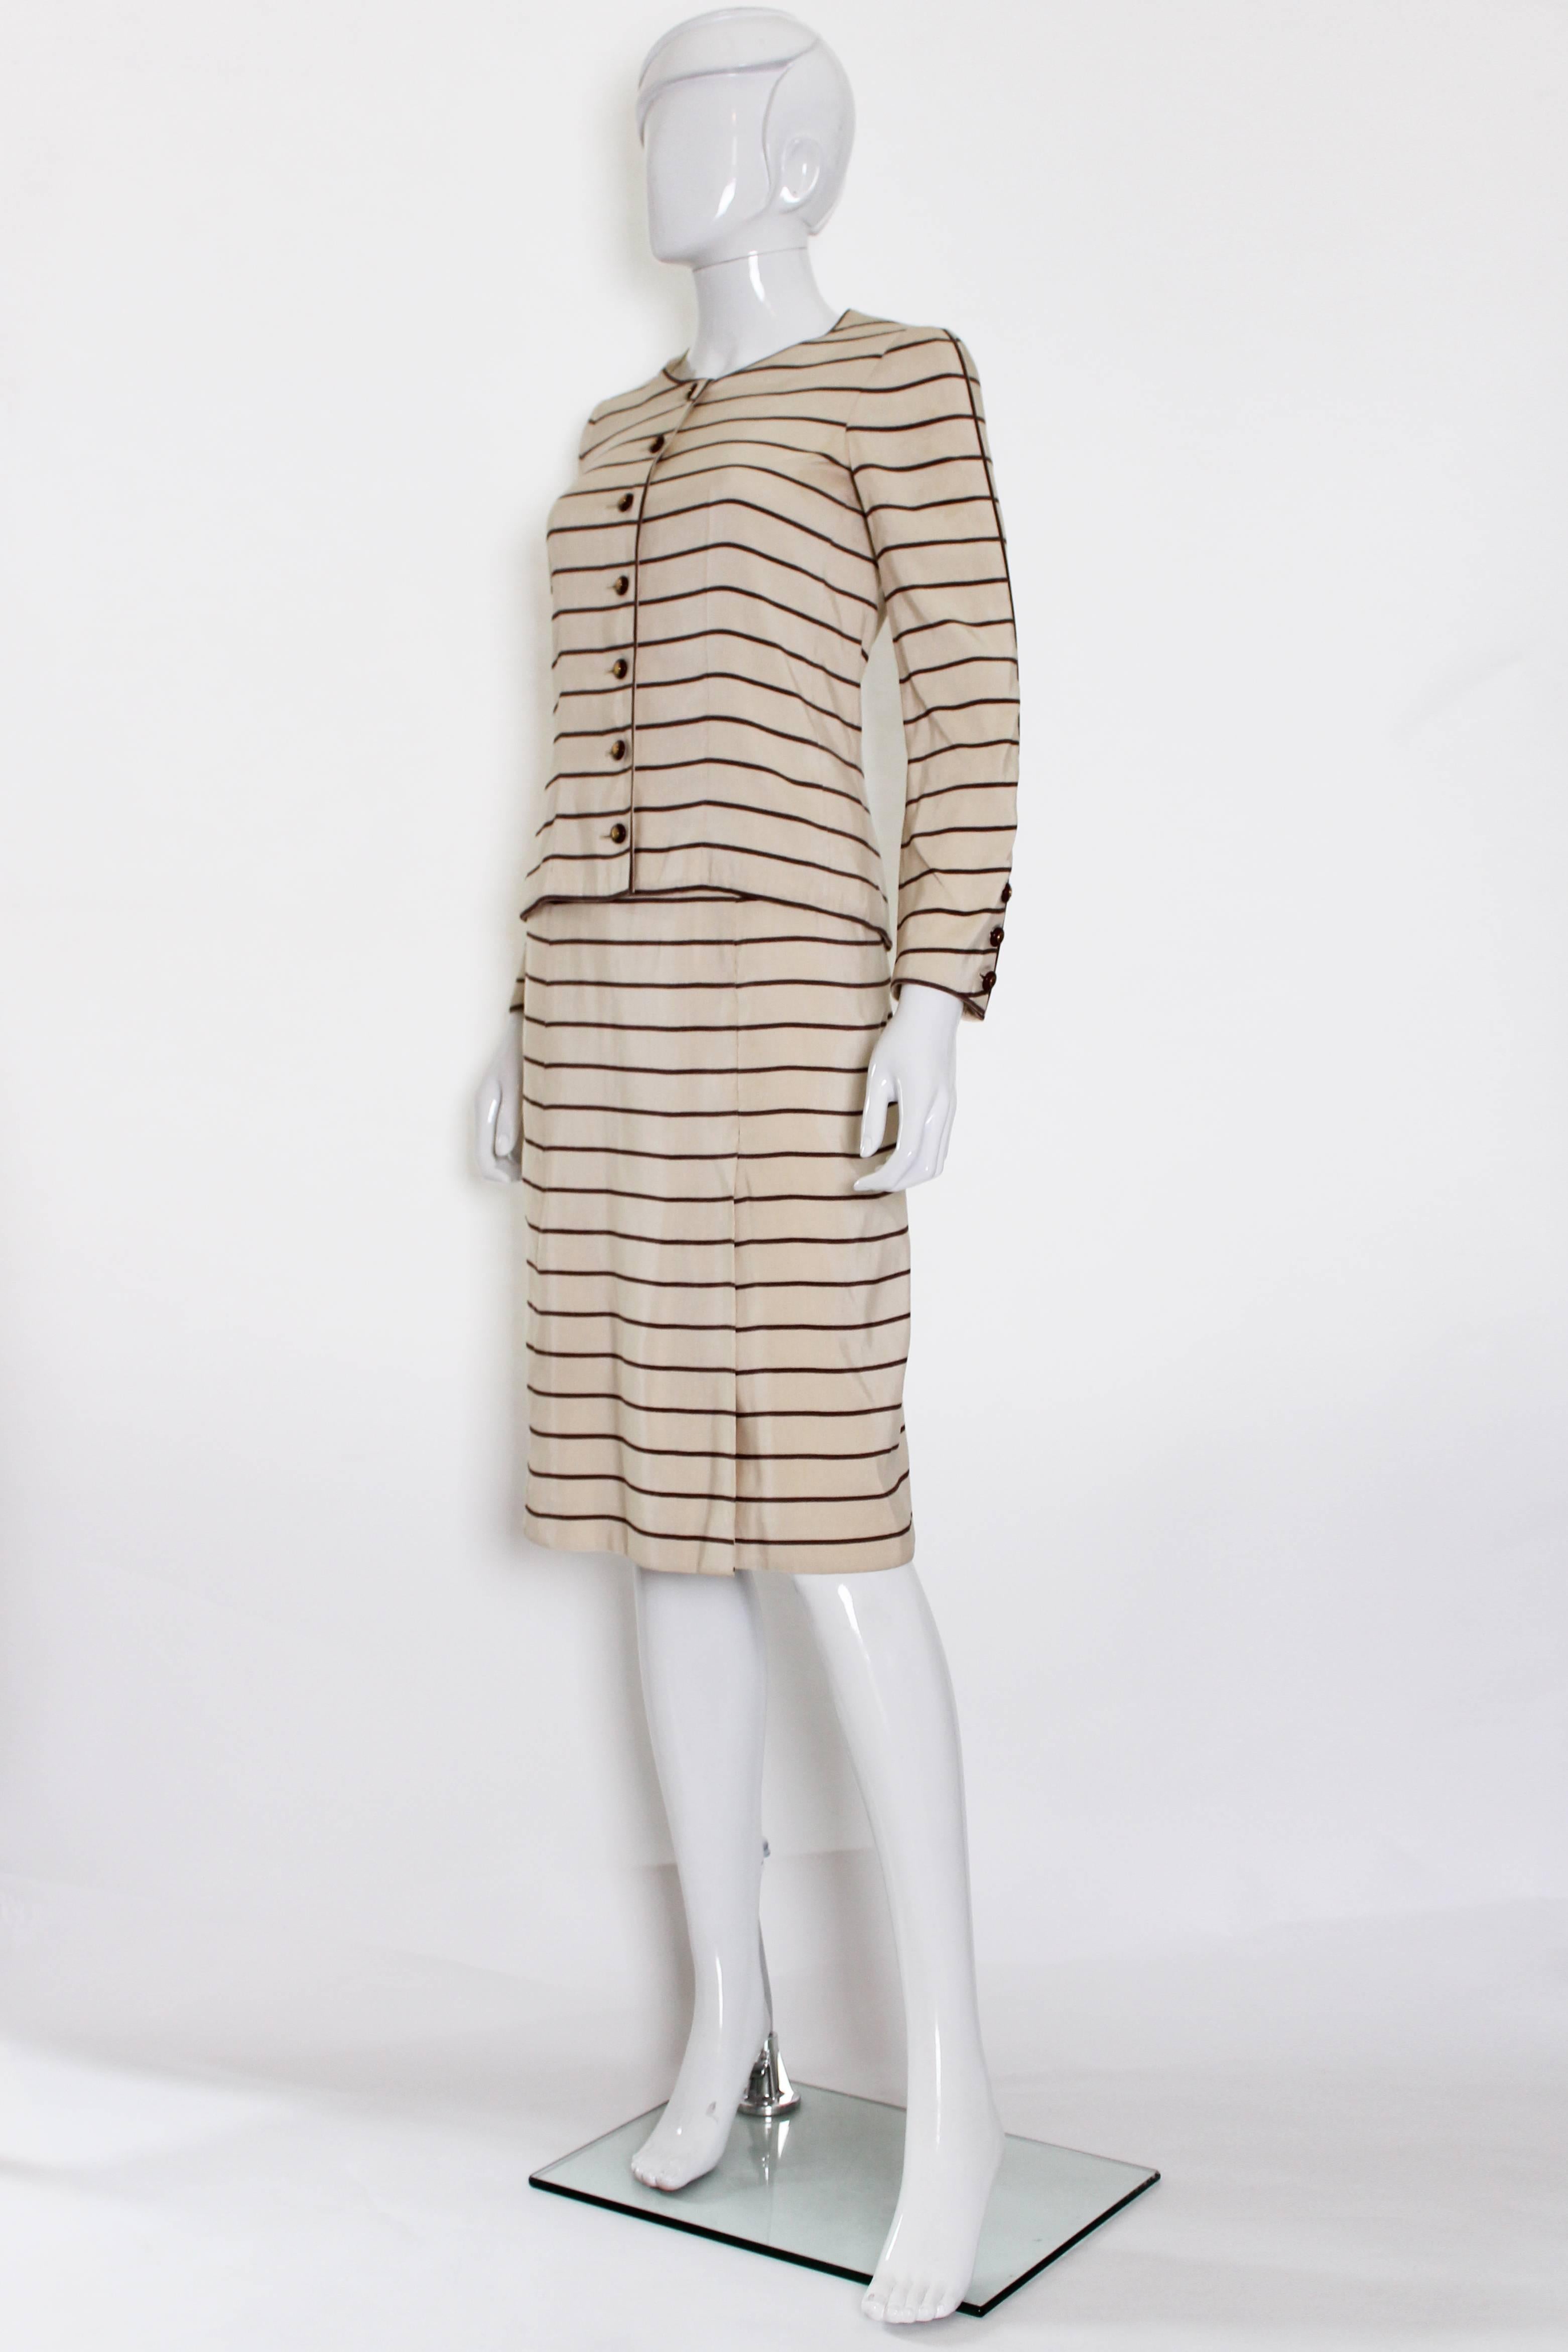 A charming and chic haute couture skirt suit by Chanel.
The suit is made of a cotton/silk mix, taupe stripes on an ivory background.
The suit is lined in silk , the buttons are made of wood, and the jacket has a chain in the hem. The jacket has a